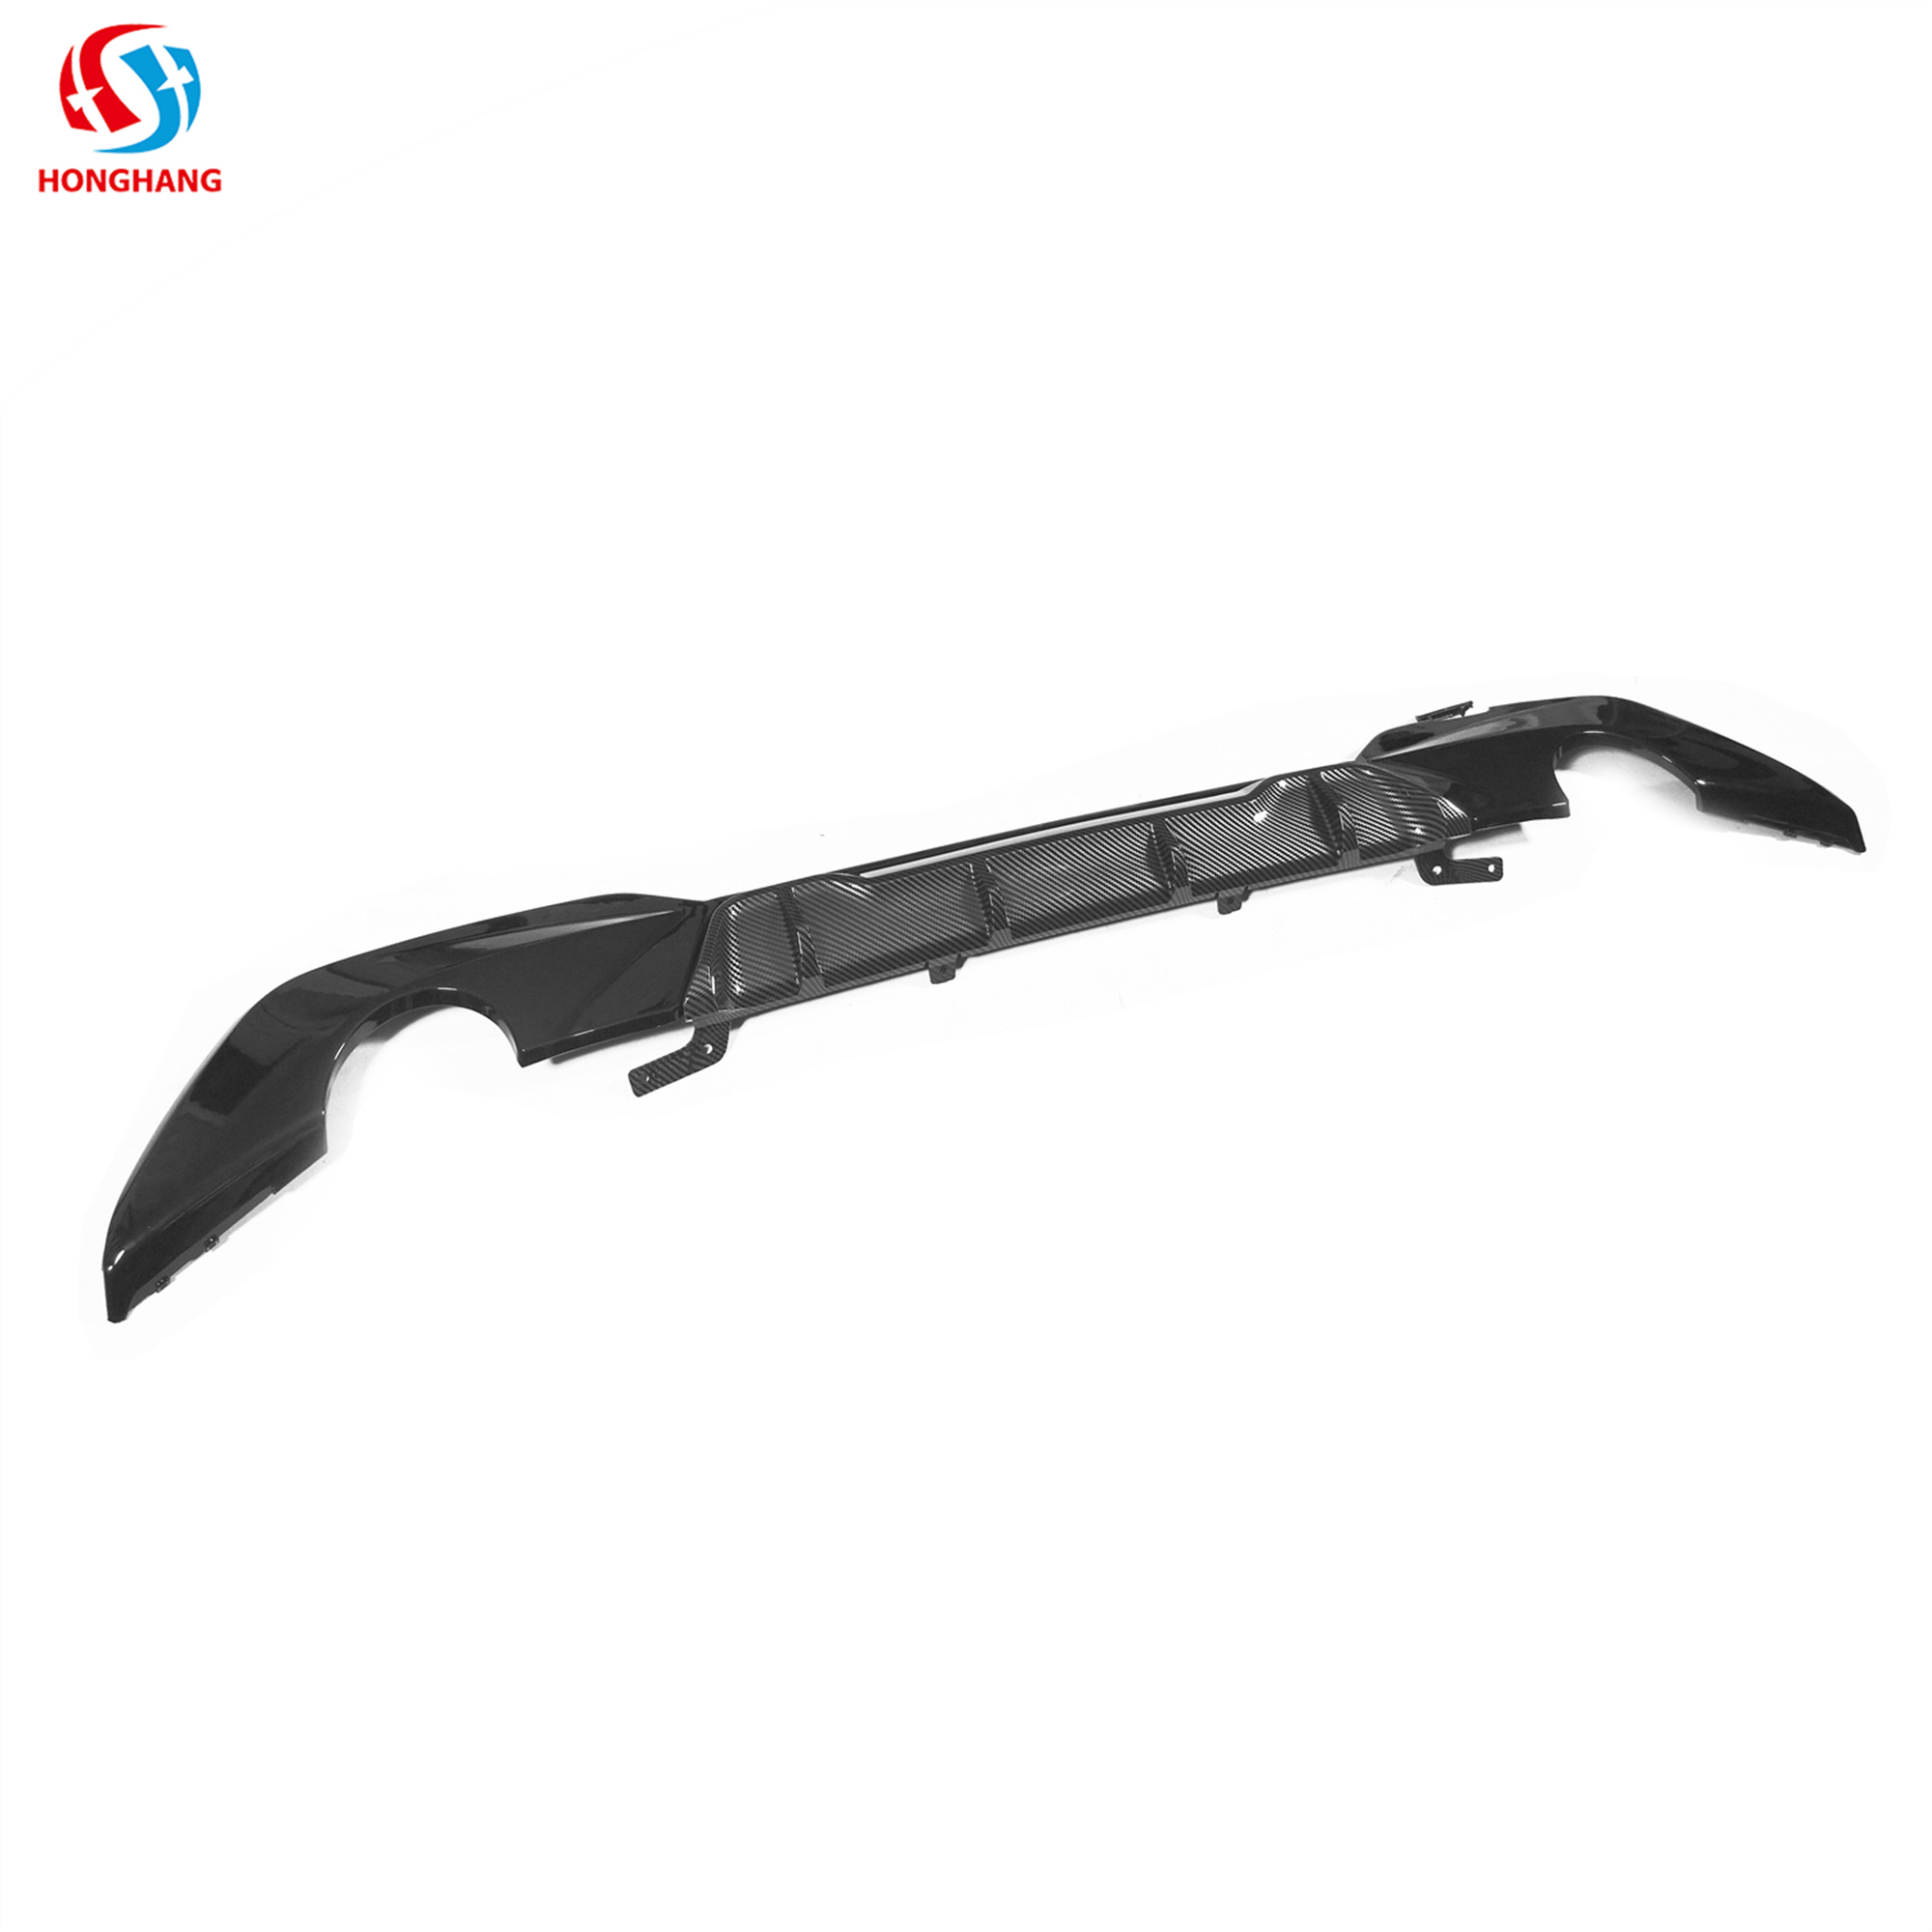 Bilateral Single Row MP Style Rear Diffuser for Bmw 3 Series G20